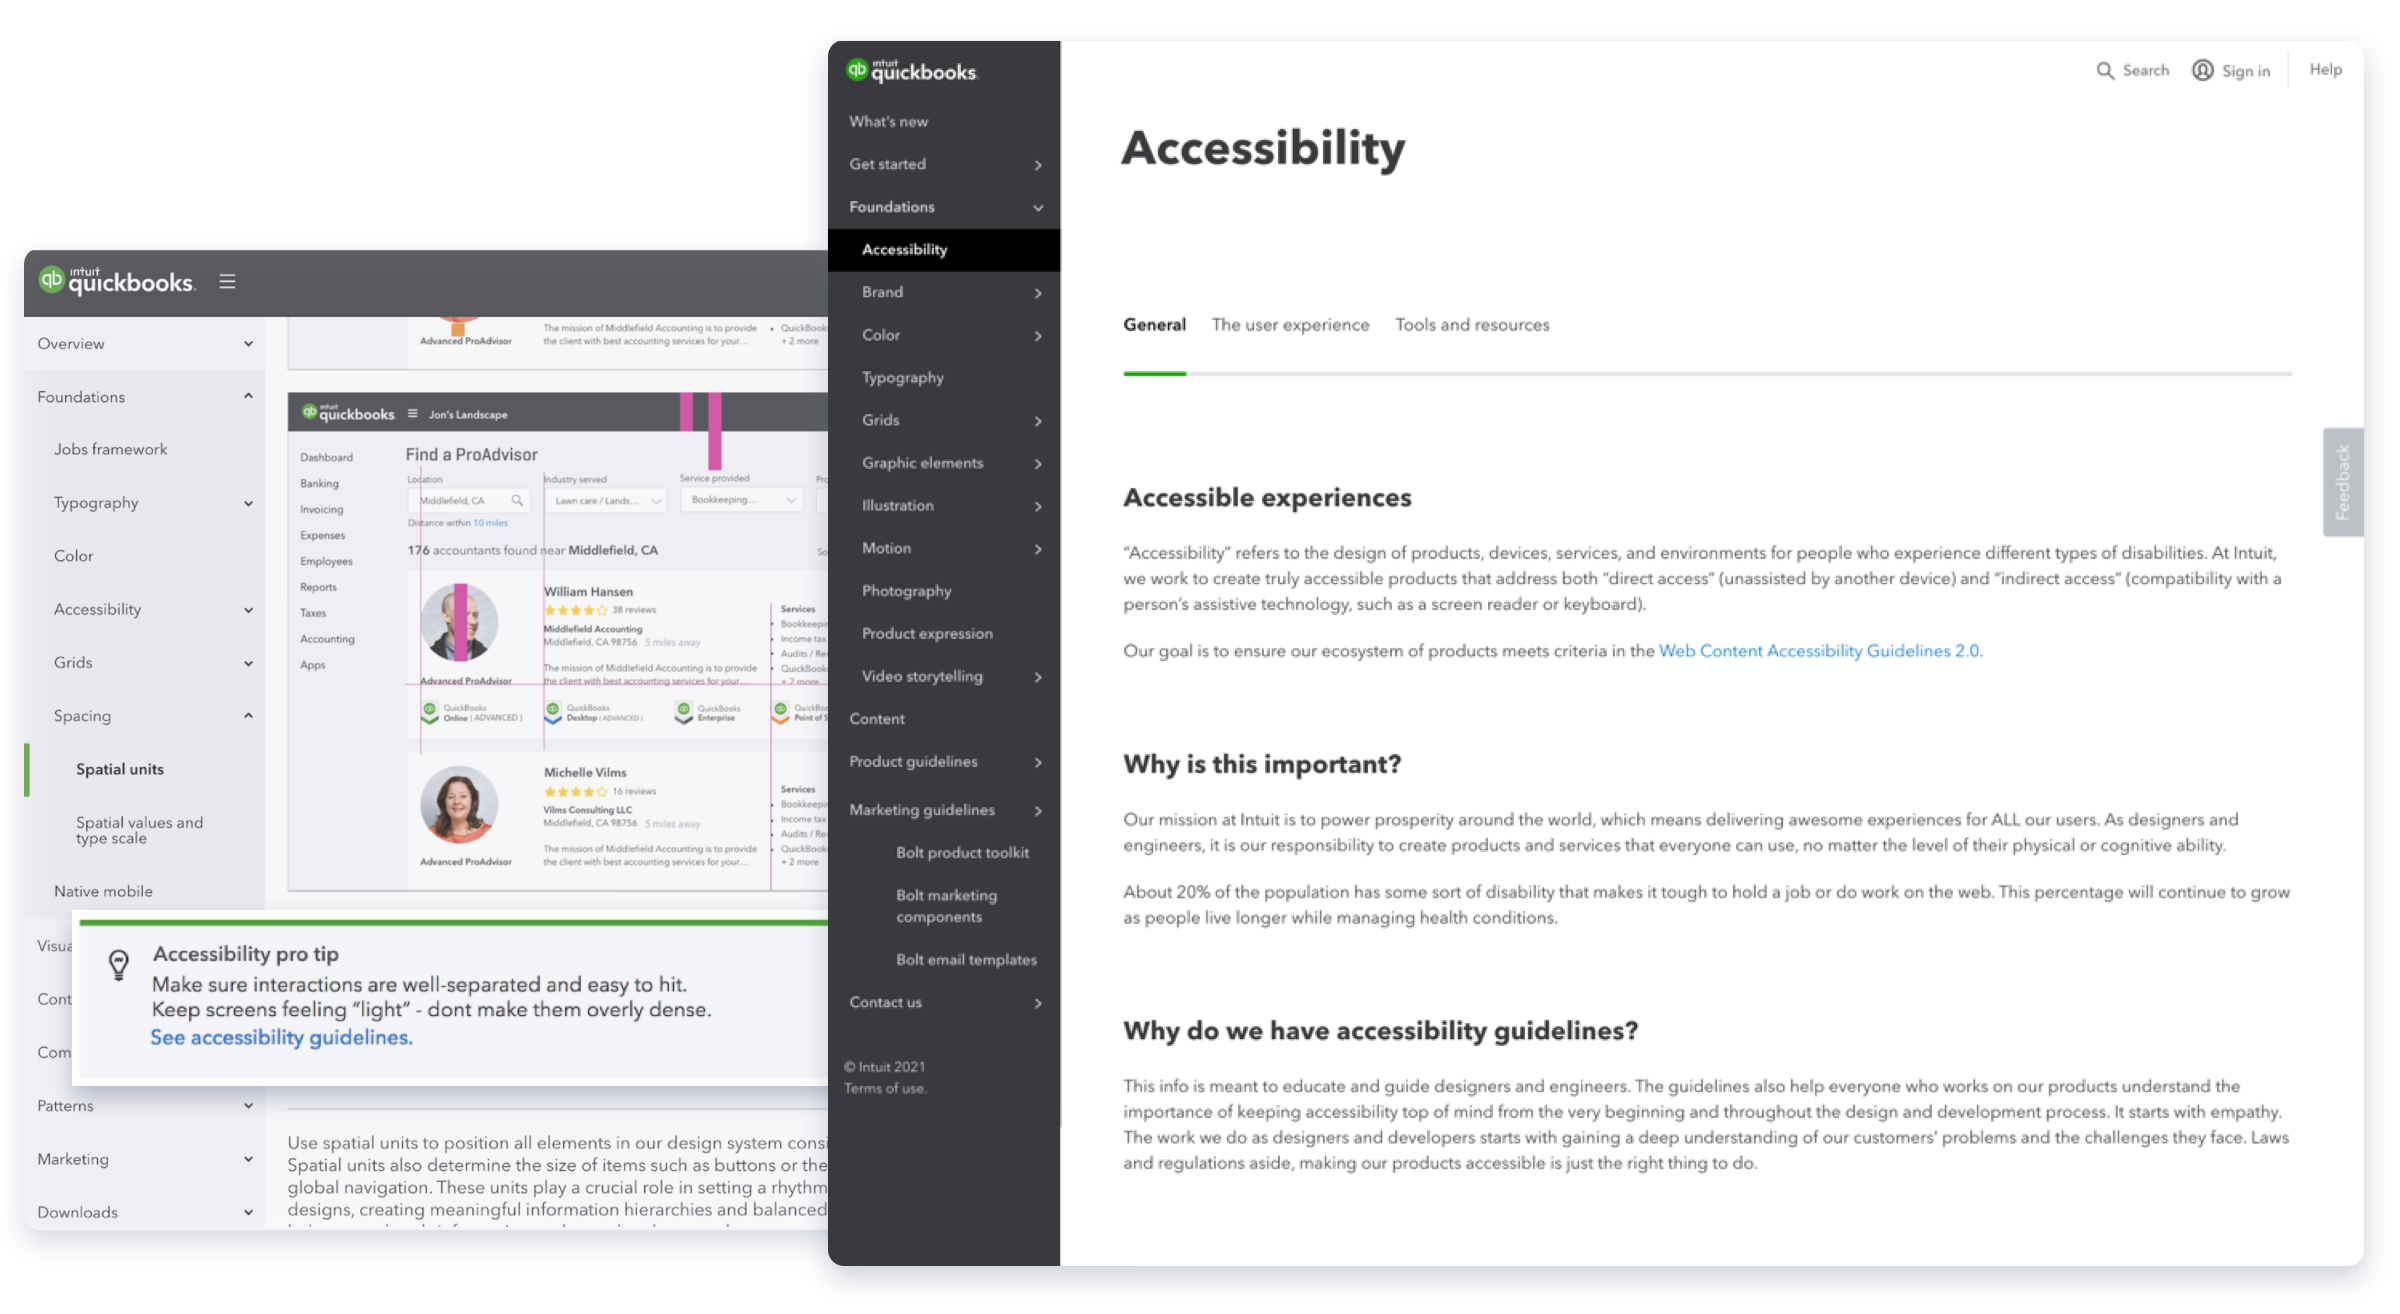 Screenshot of QuickBooks Accessibility page from the QuickBooks design system website